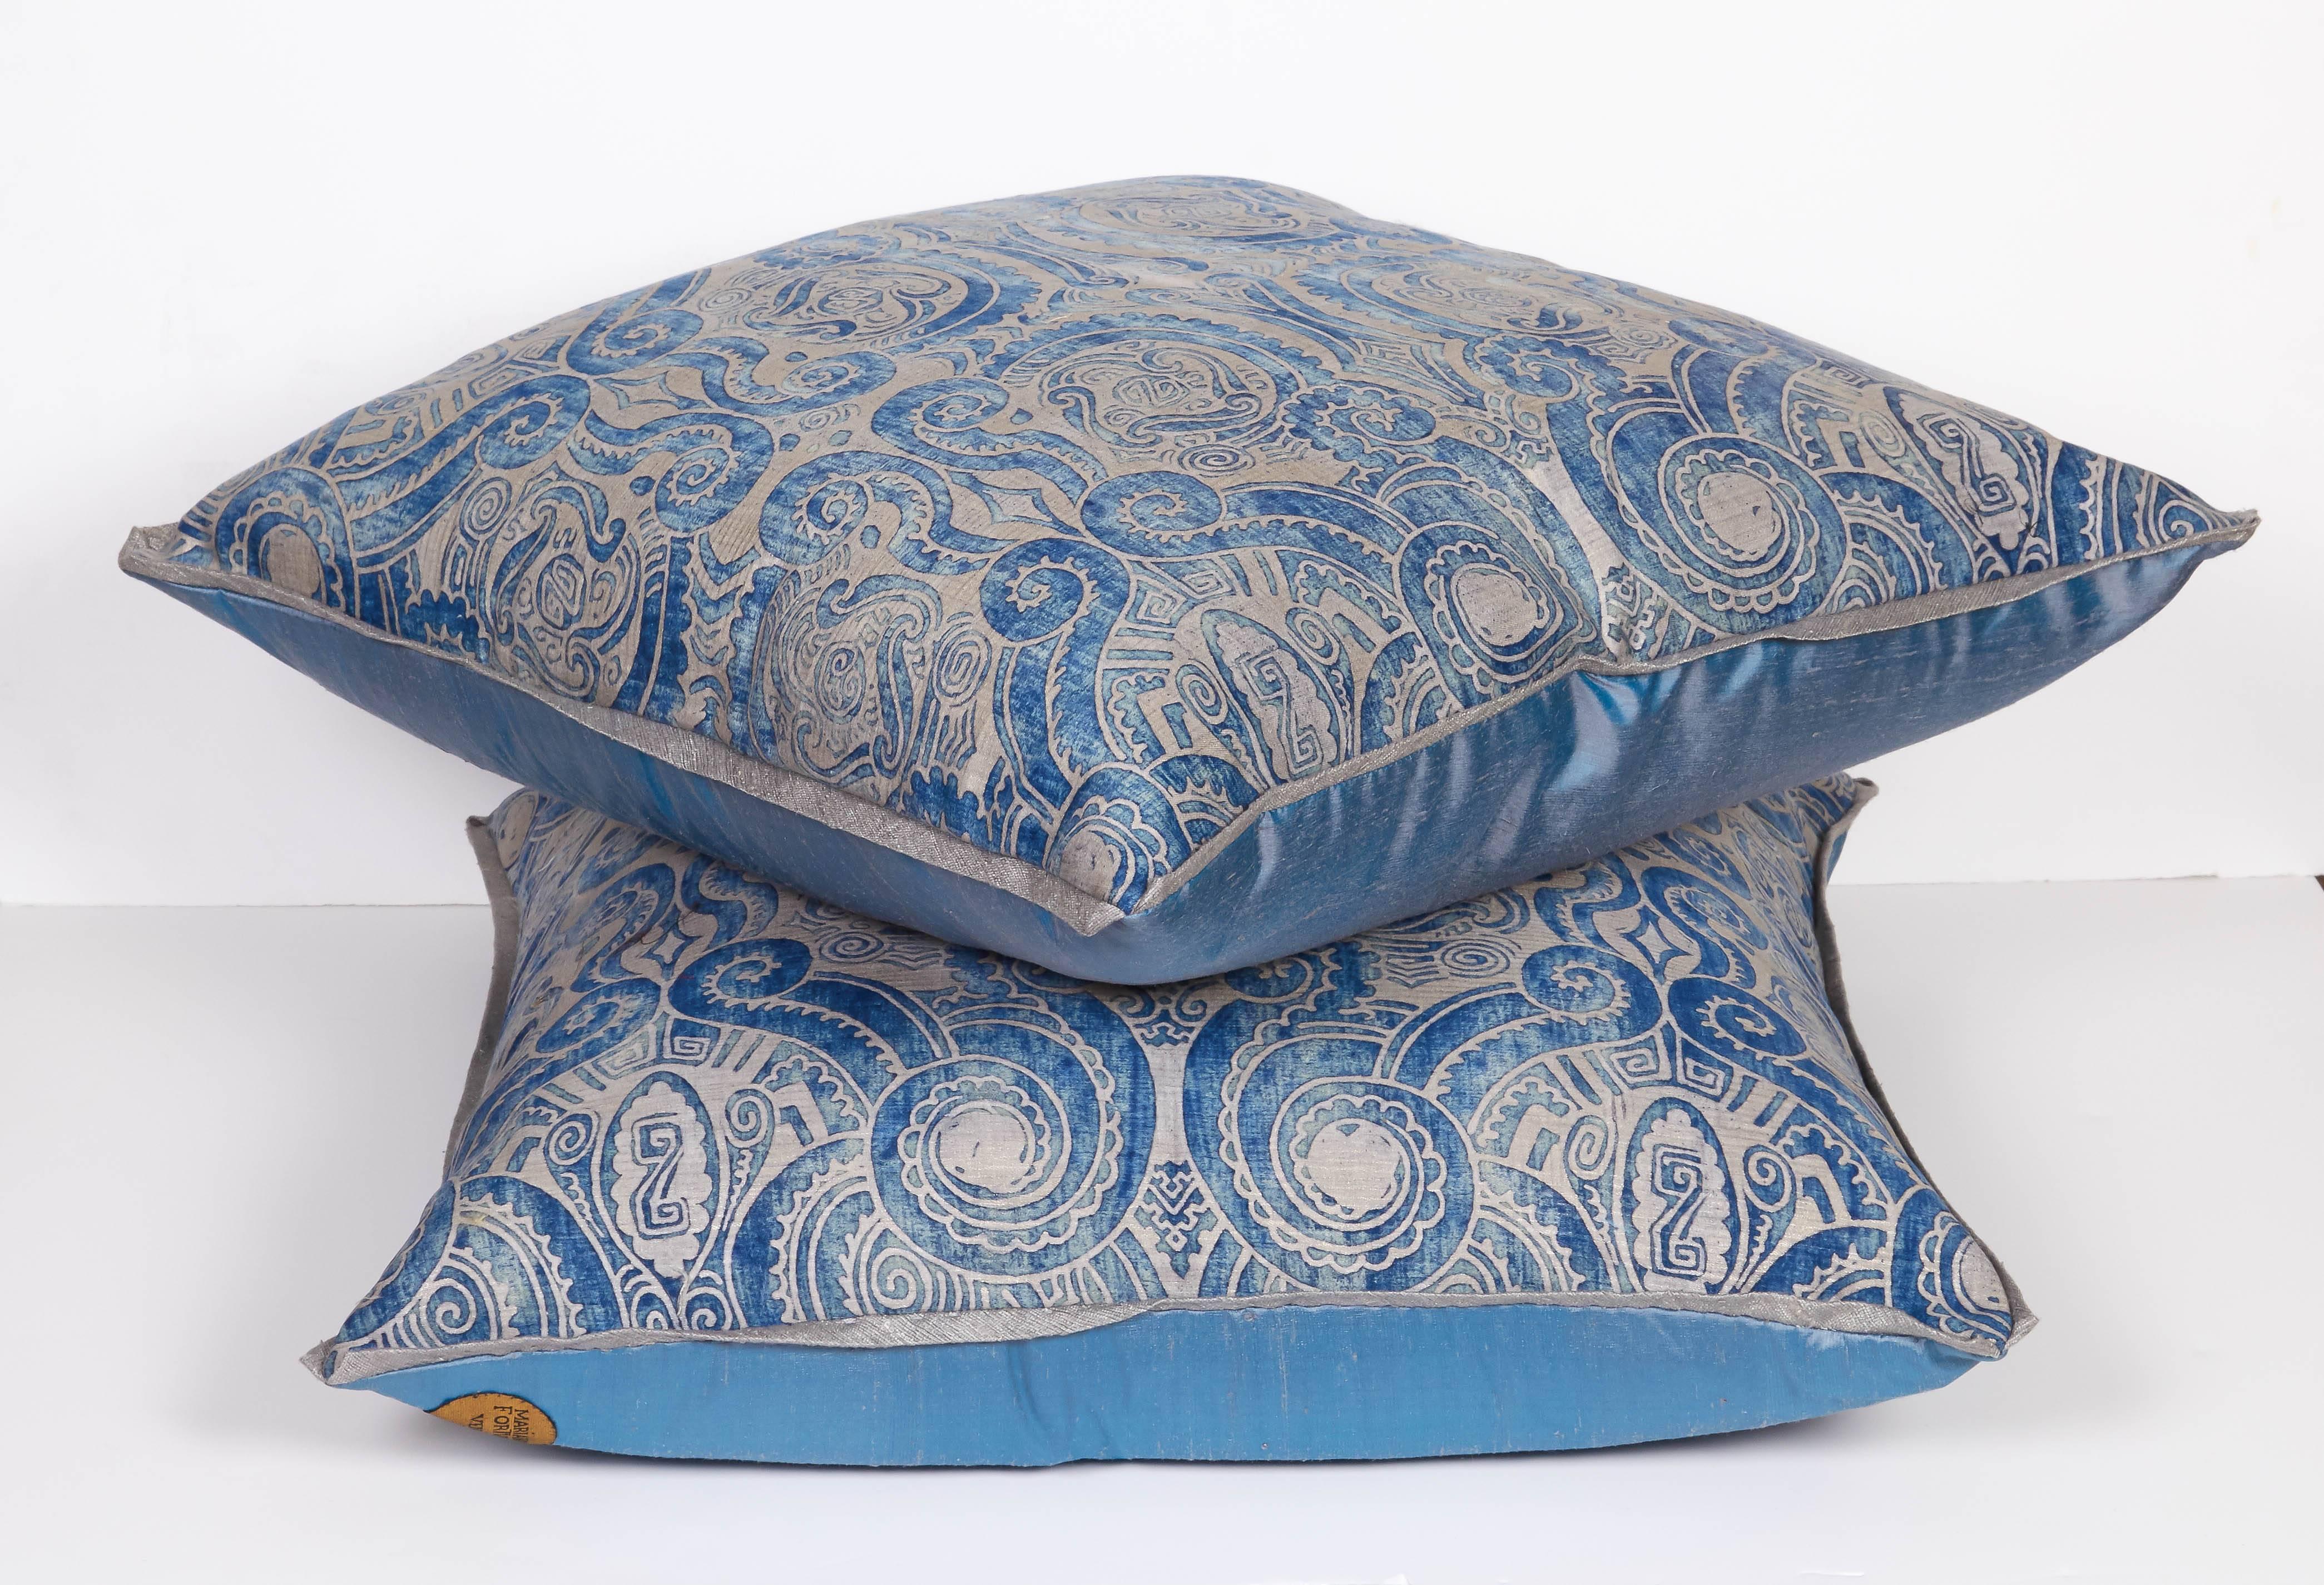 A pair of Fortuny fabric cushions in the Peruviano pattern, indigo and silver color way with silk bias edging and blue taffeta backing material, the pattern, a Peruvian inspired design with scroll motif. Newly made using vintage Fortuny fabric,